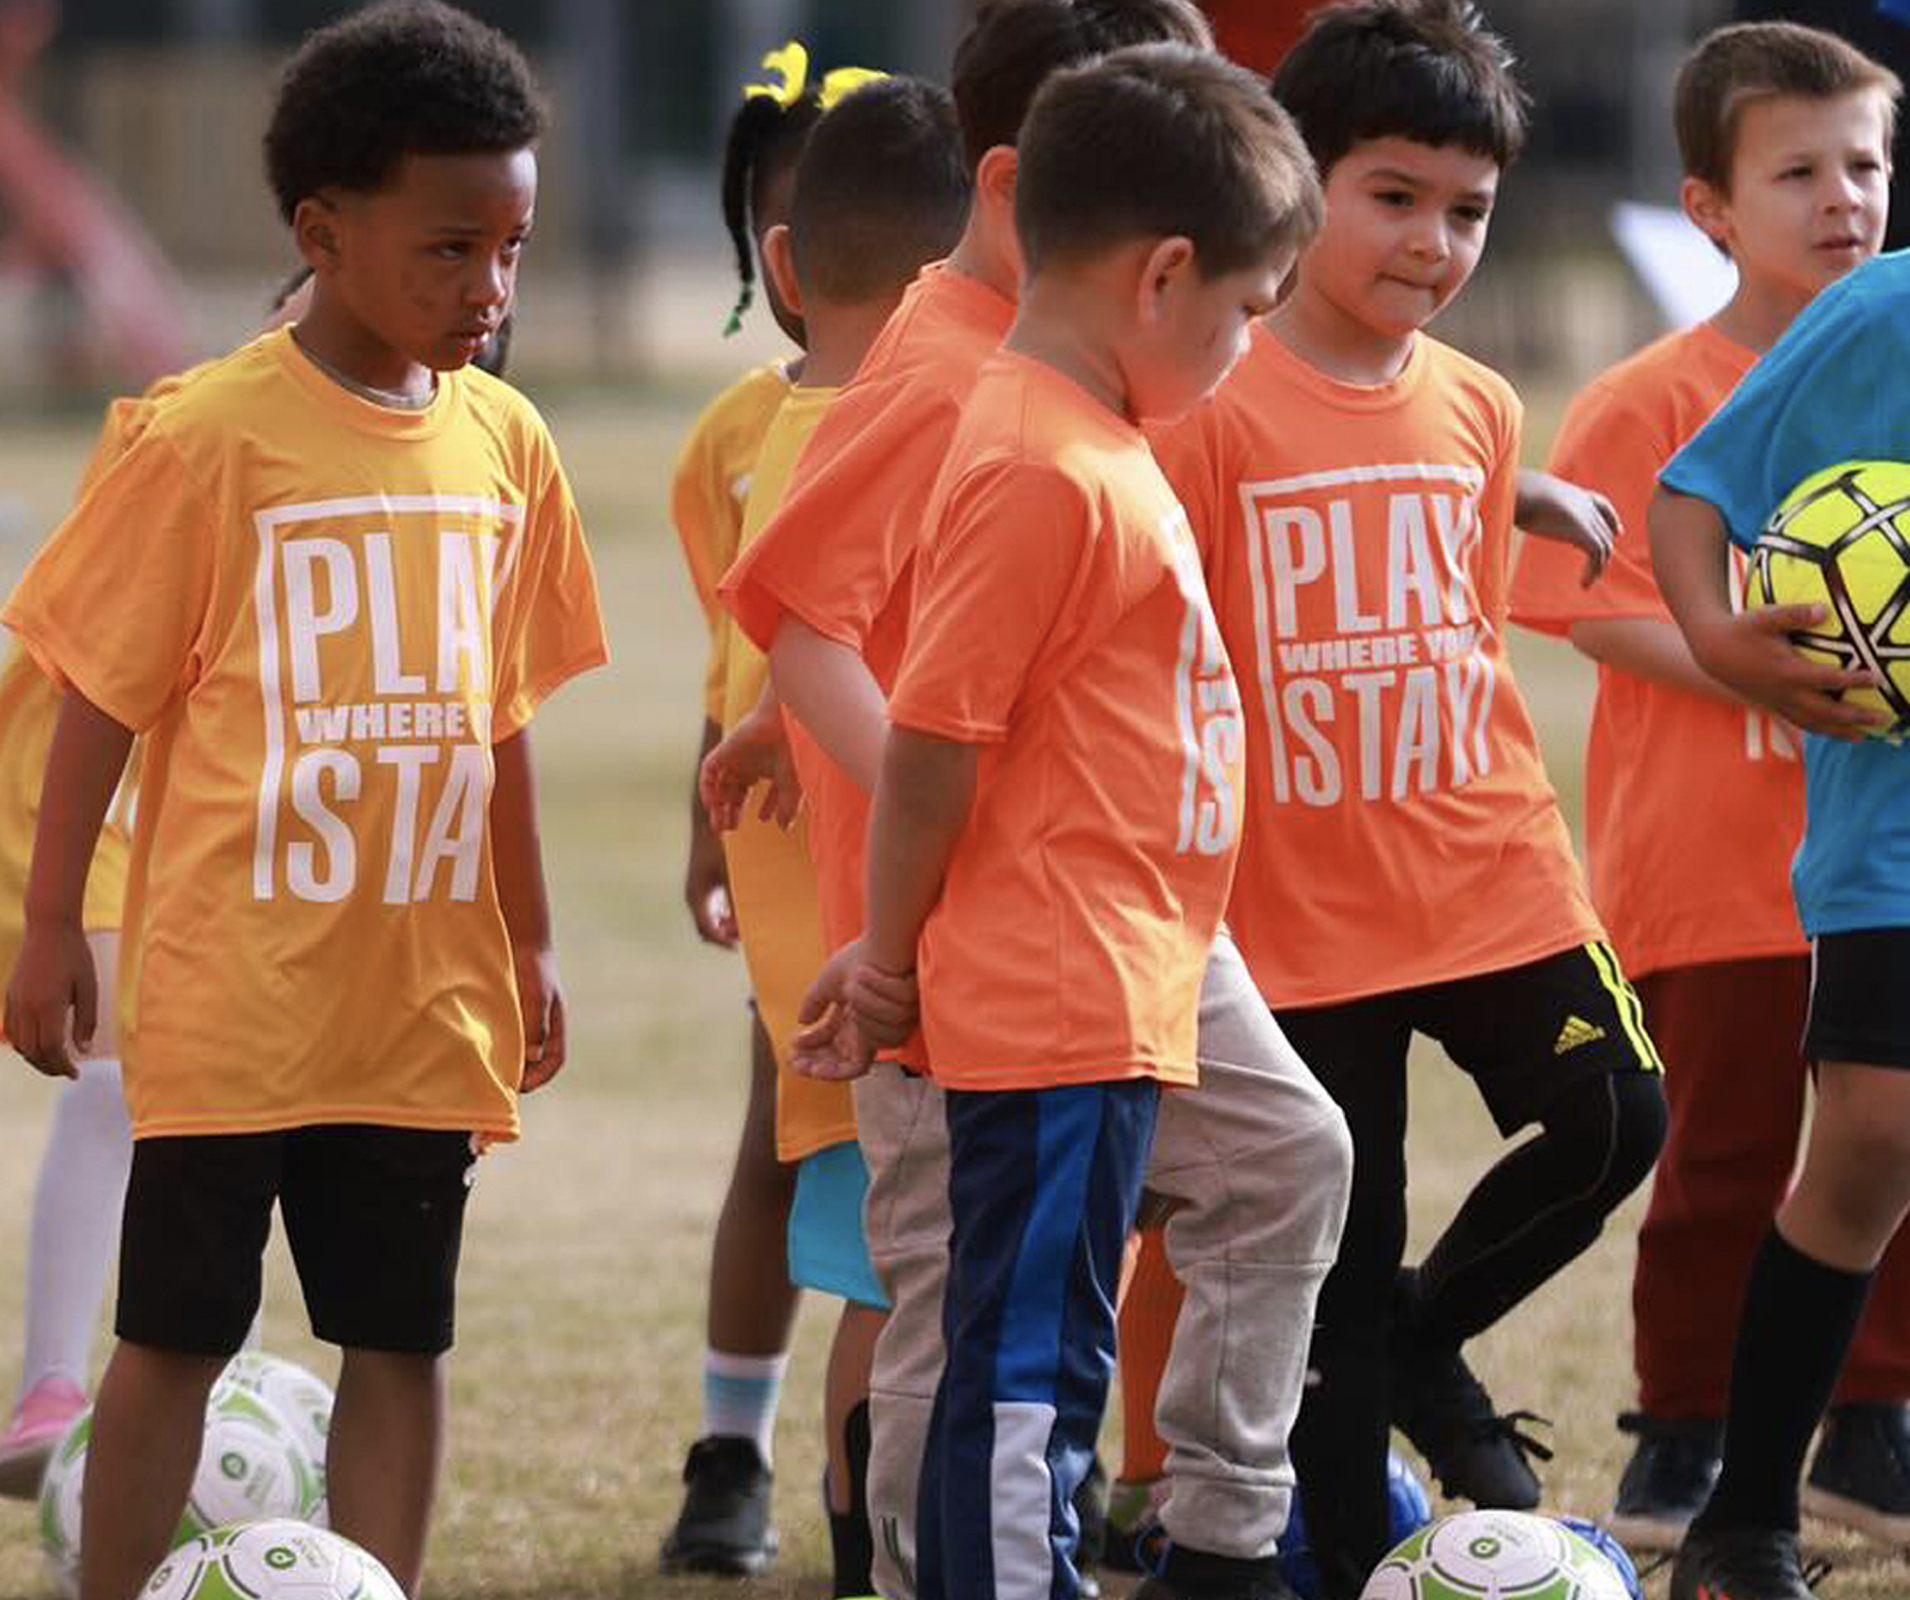 Street Soccer USA Announces Affiliate Partnership with Play Where You Stay – Memphis